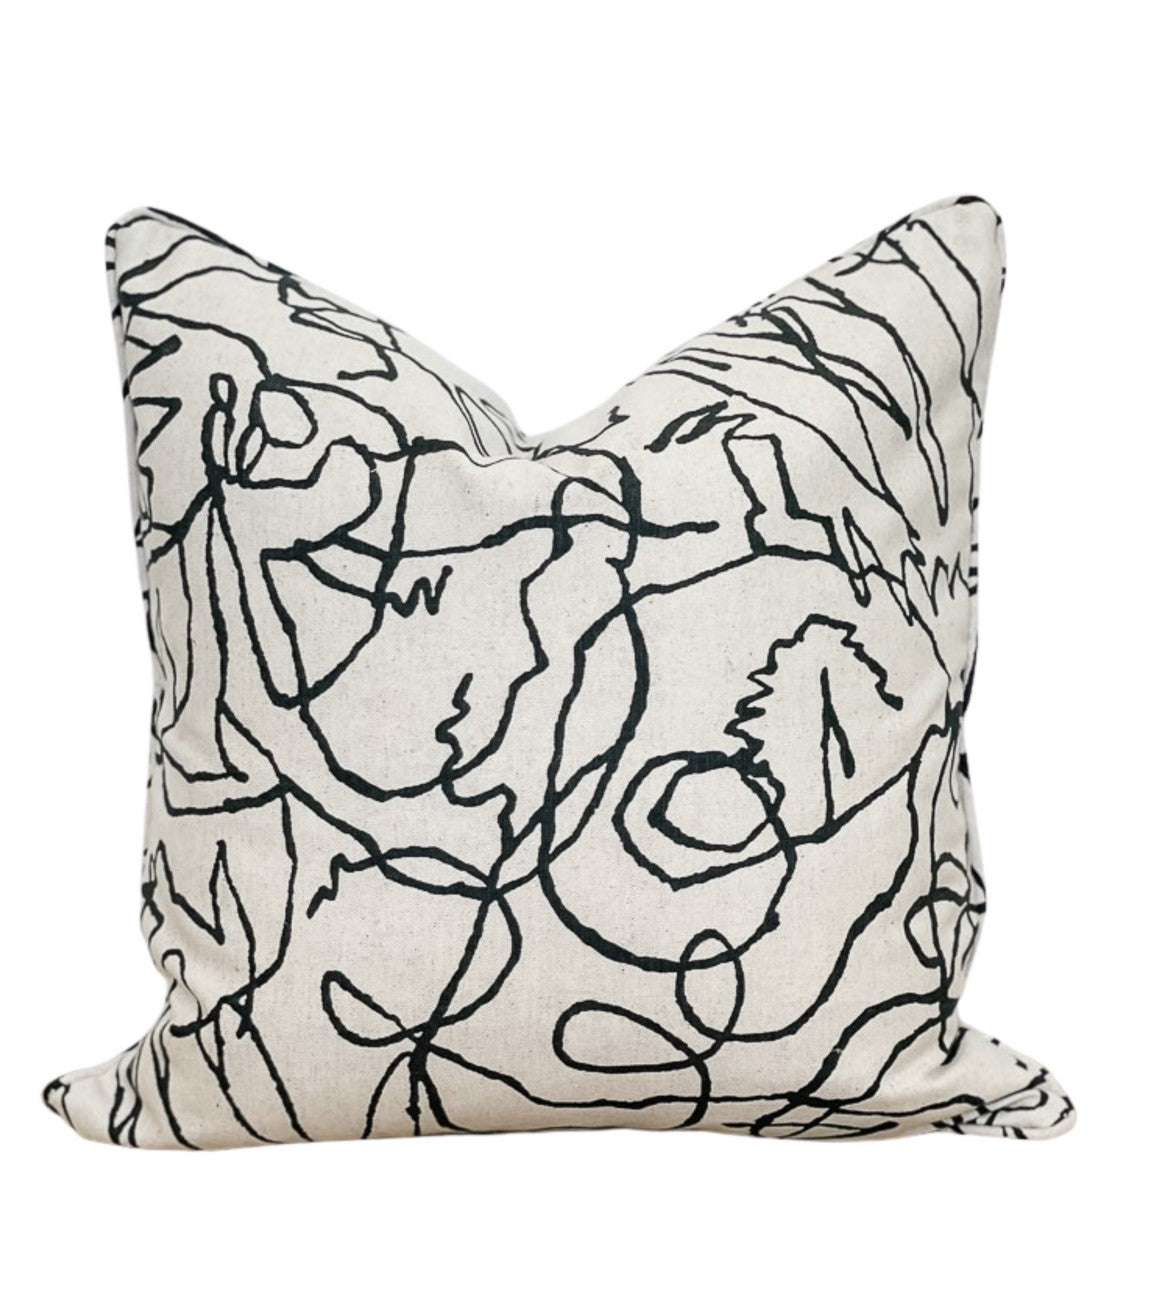 Cushion Cover - Sketch with Piping